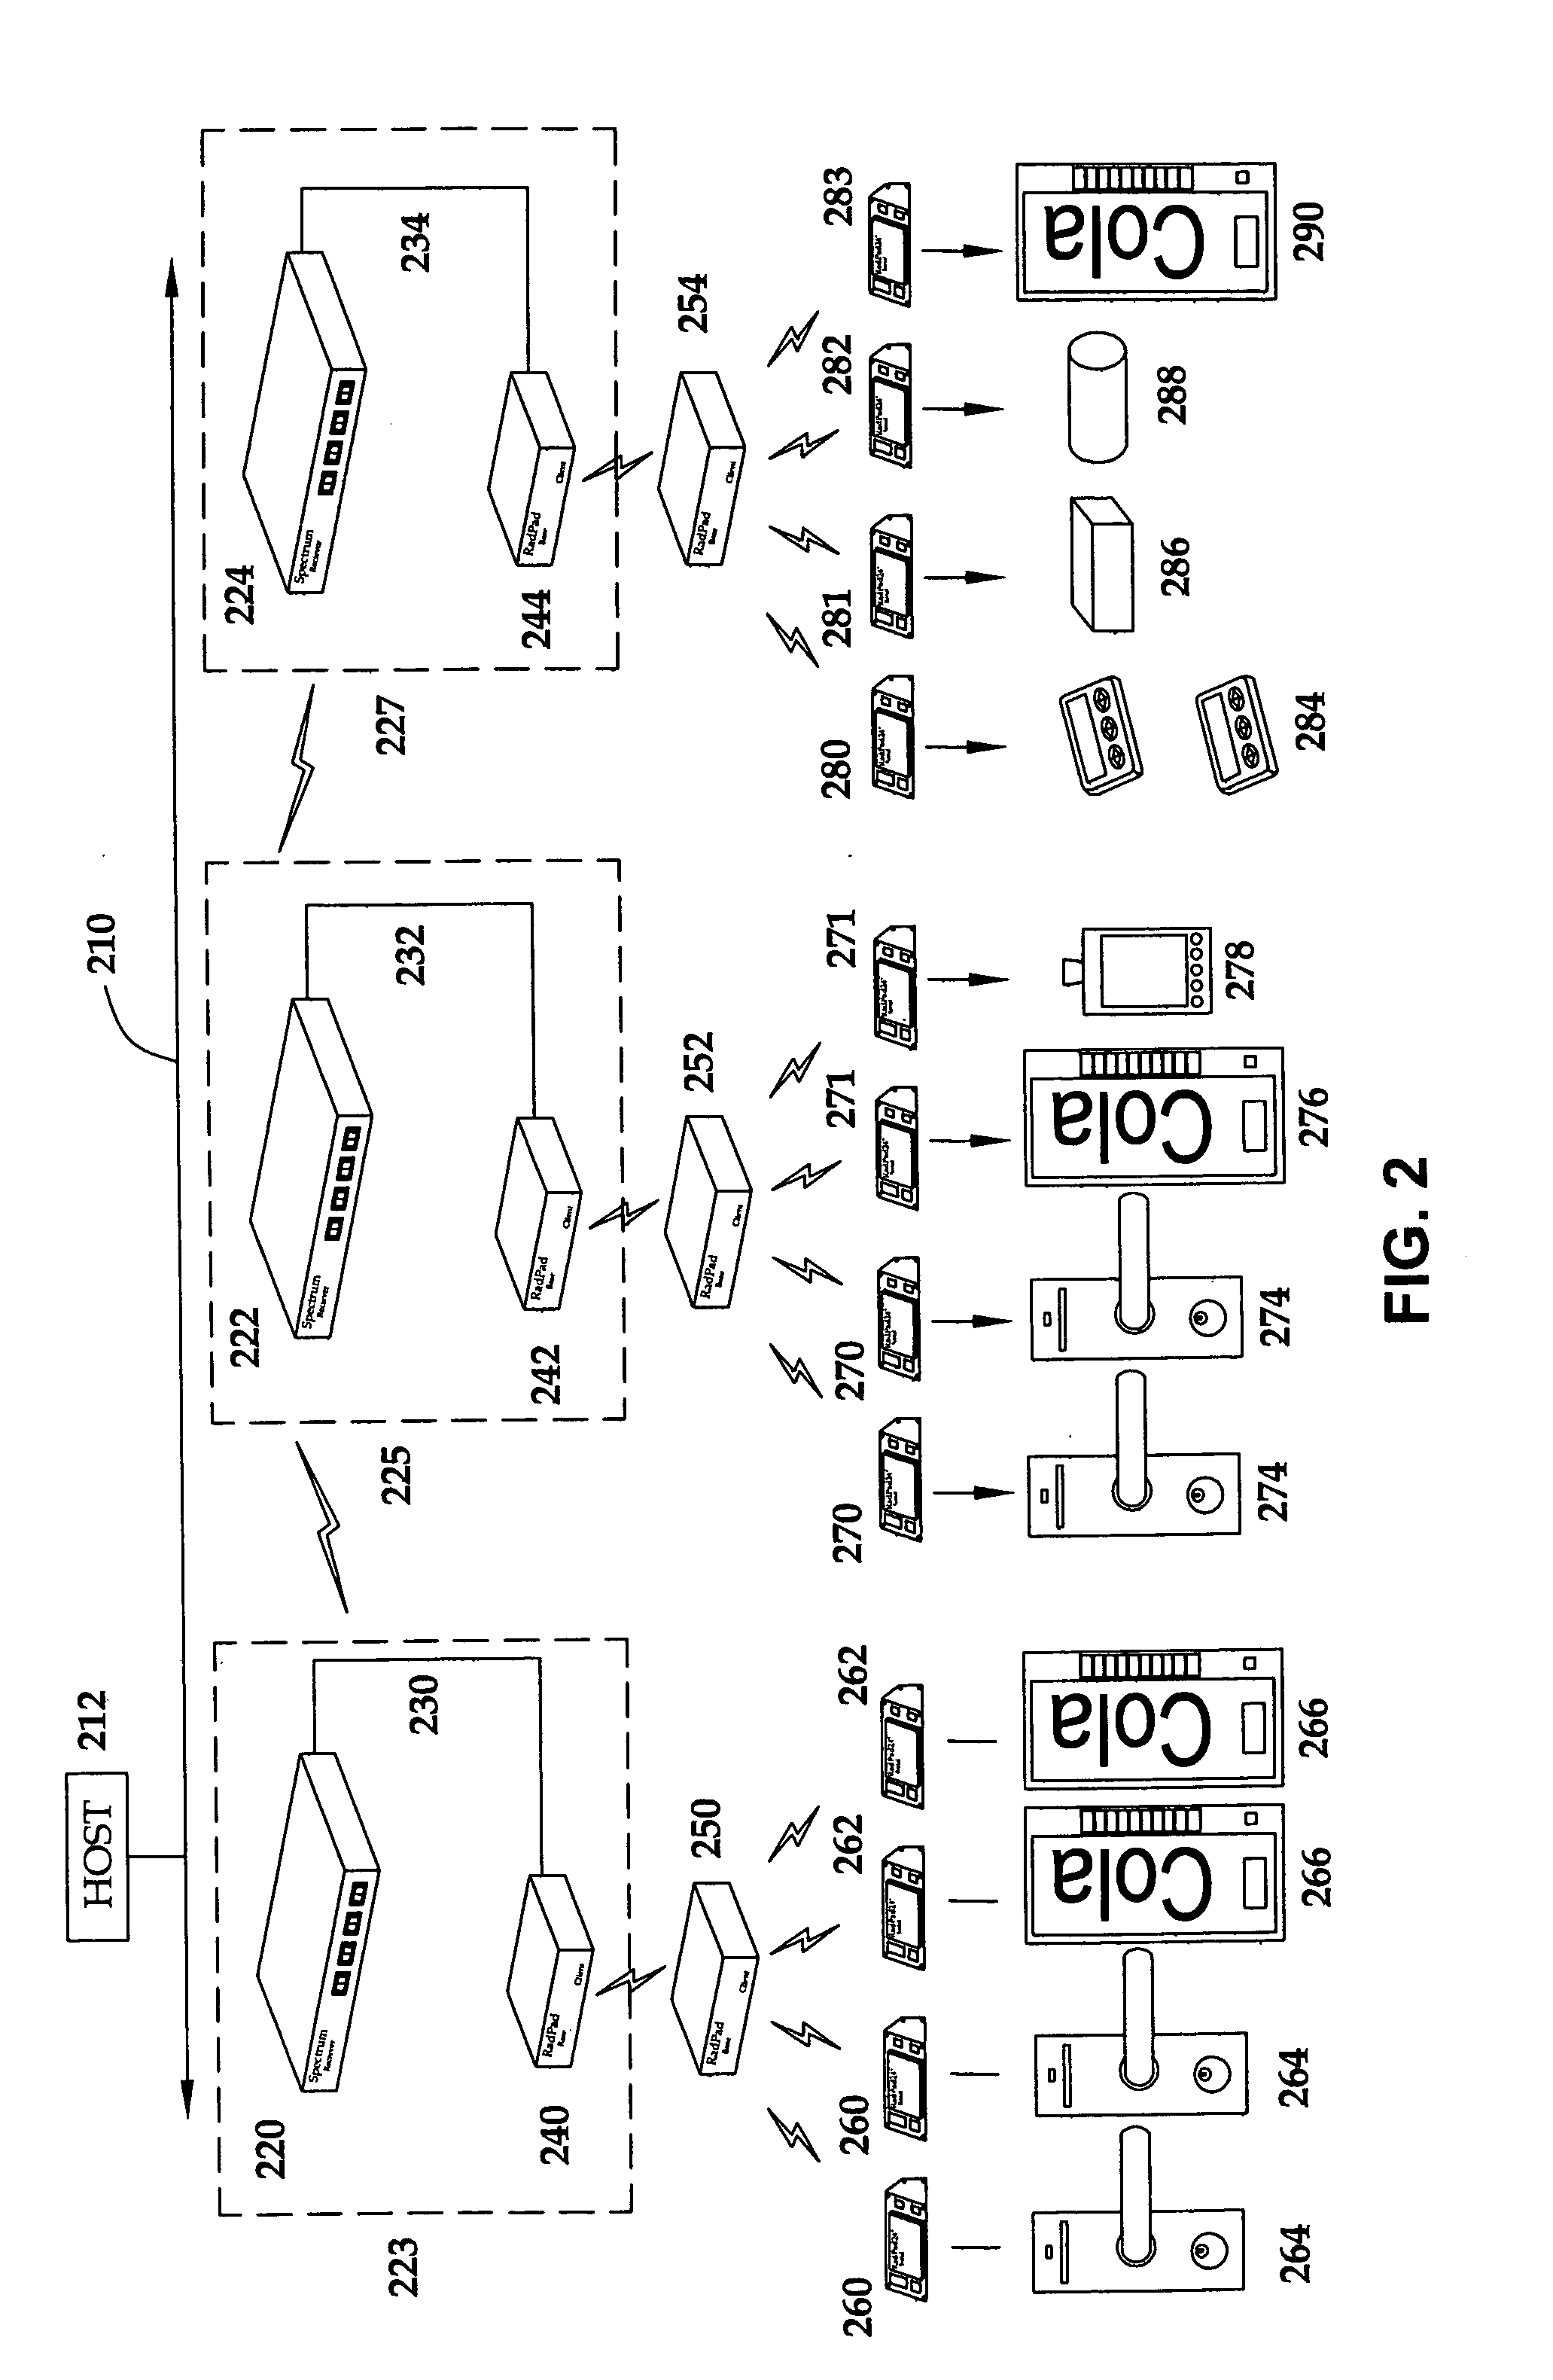 Multi-tier wireless communications architecture, applications and methods